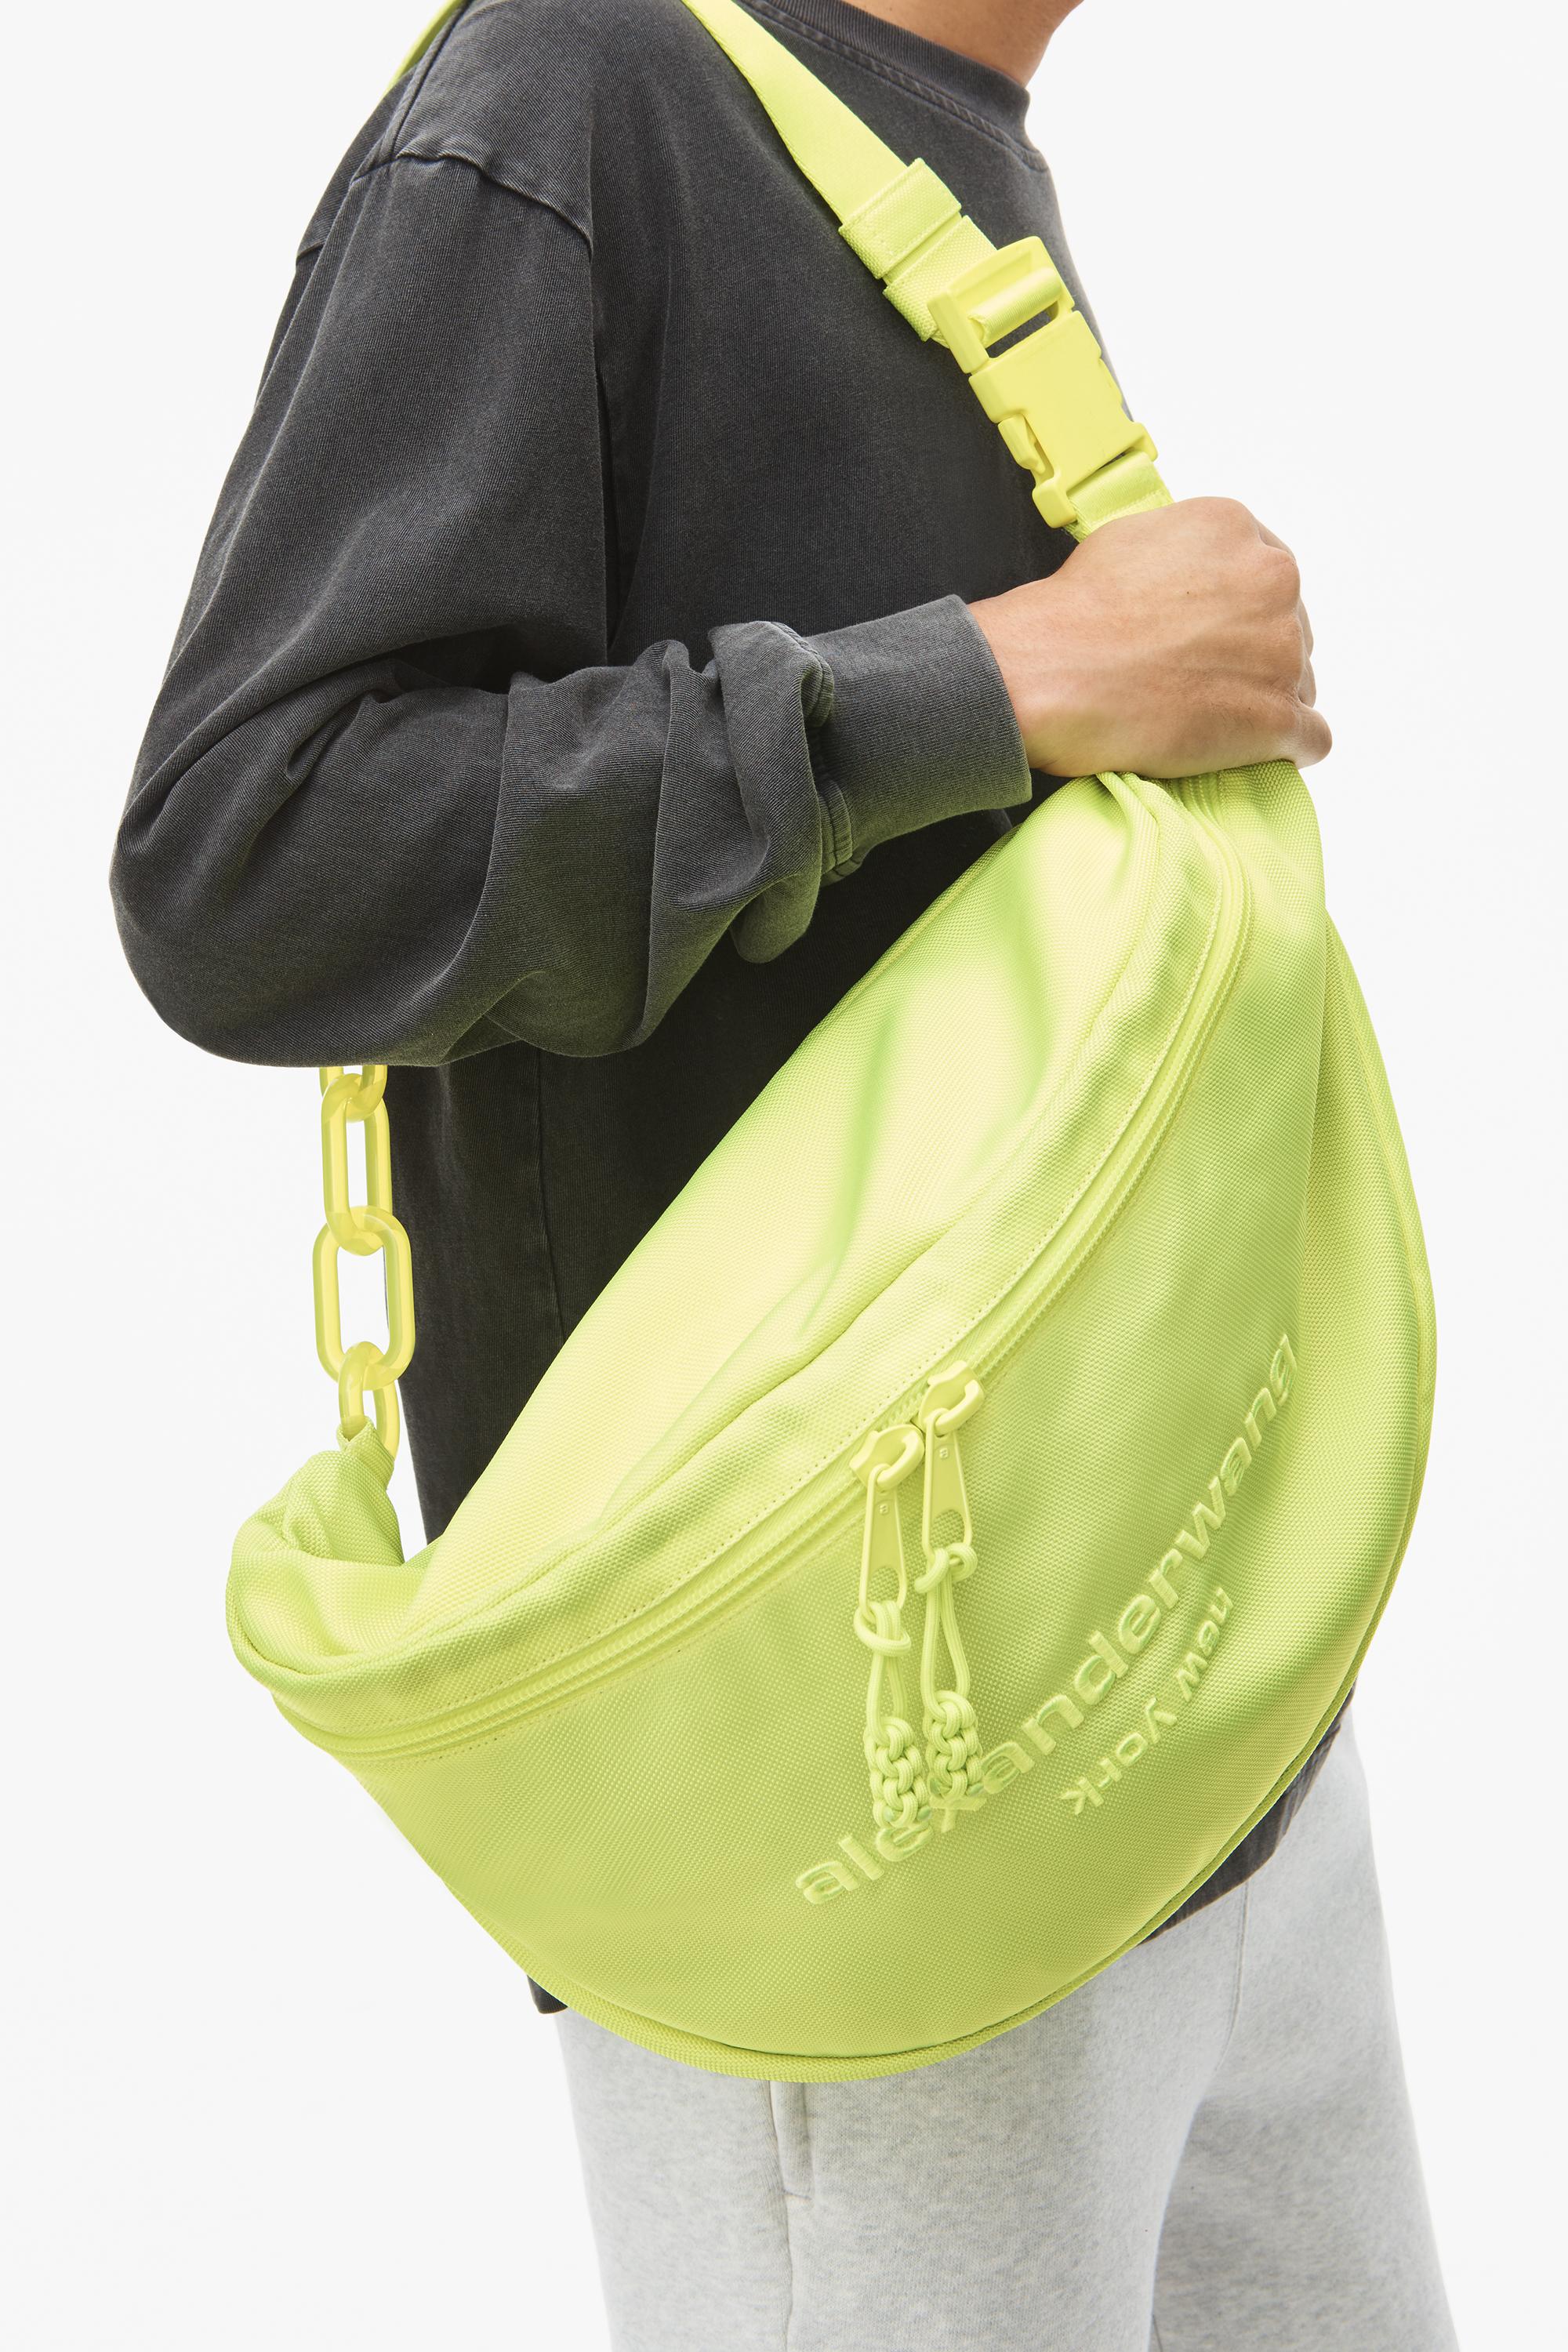 Alexander Wang Synthetic Primal Large Nylon Fanny Pack in Yellow 